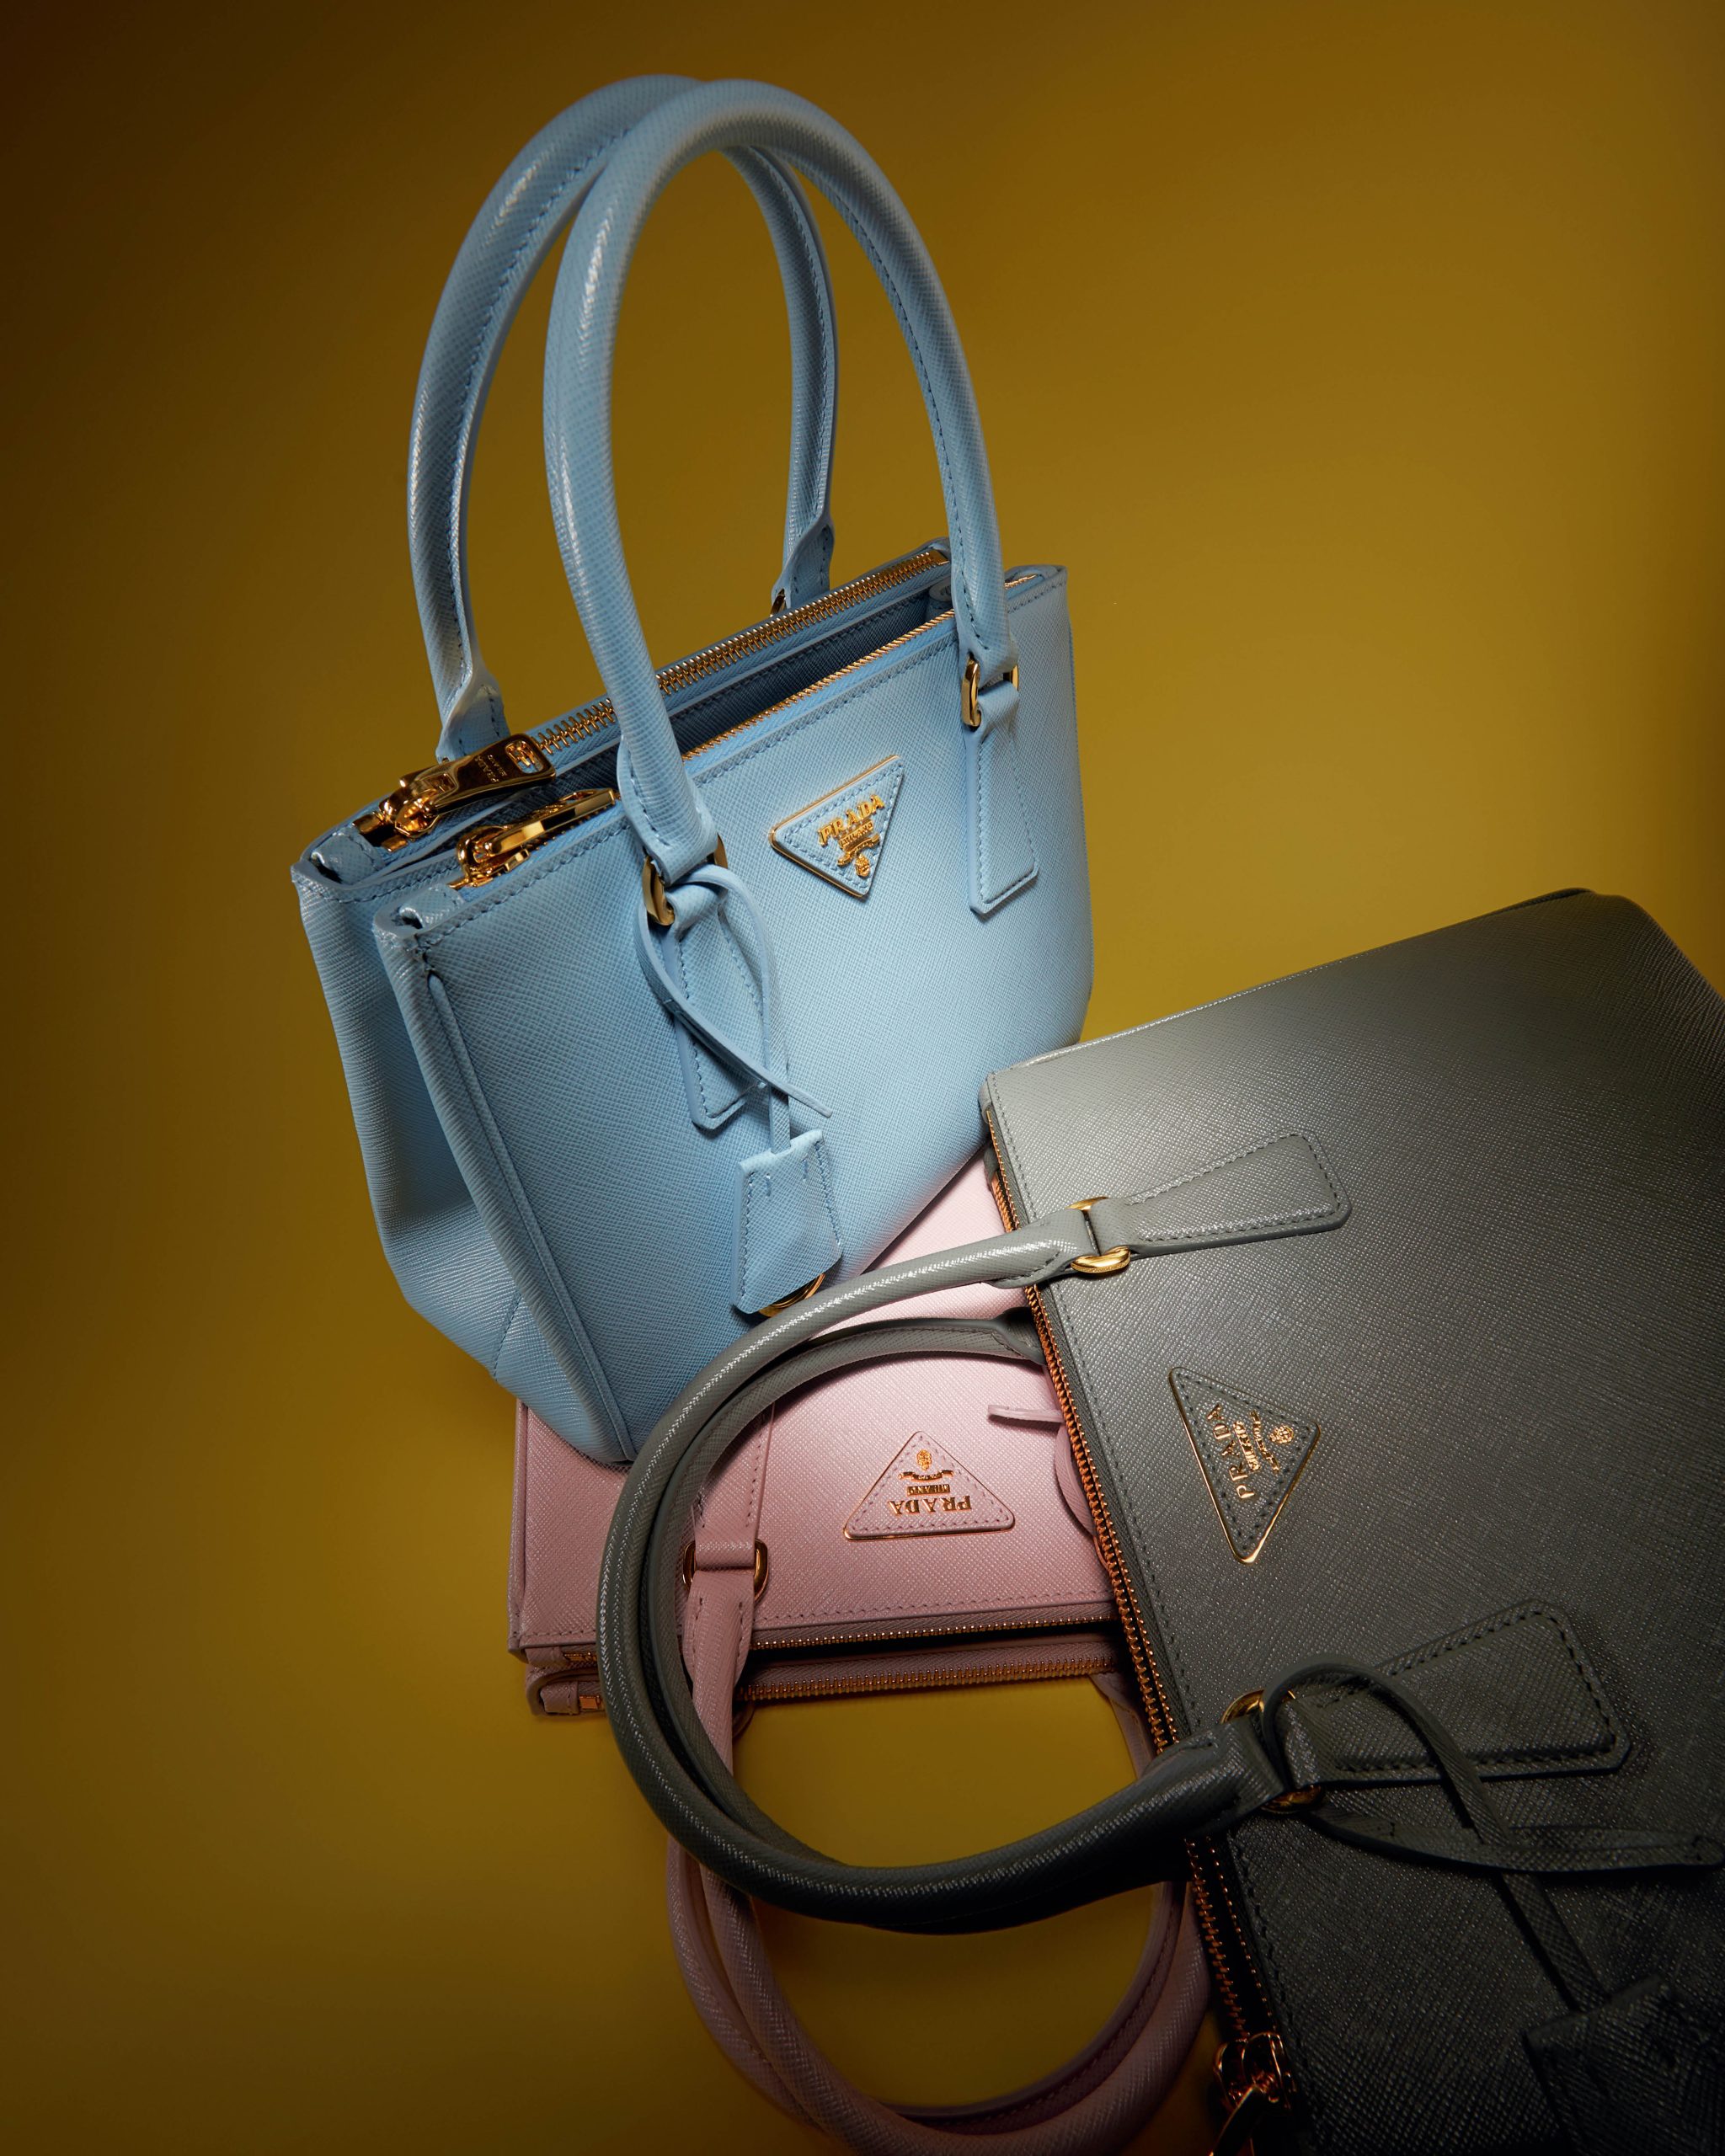 Diplomaat wetenschapper Klik Why The Prada Galleria Bag Will Forever Be A Fashion Staple